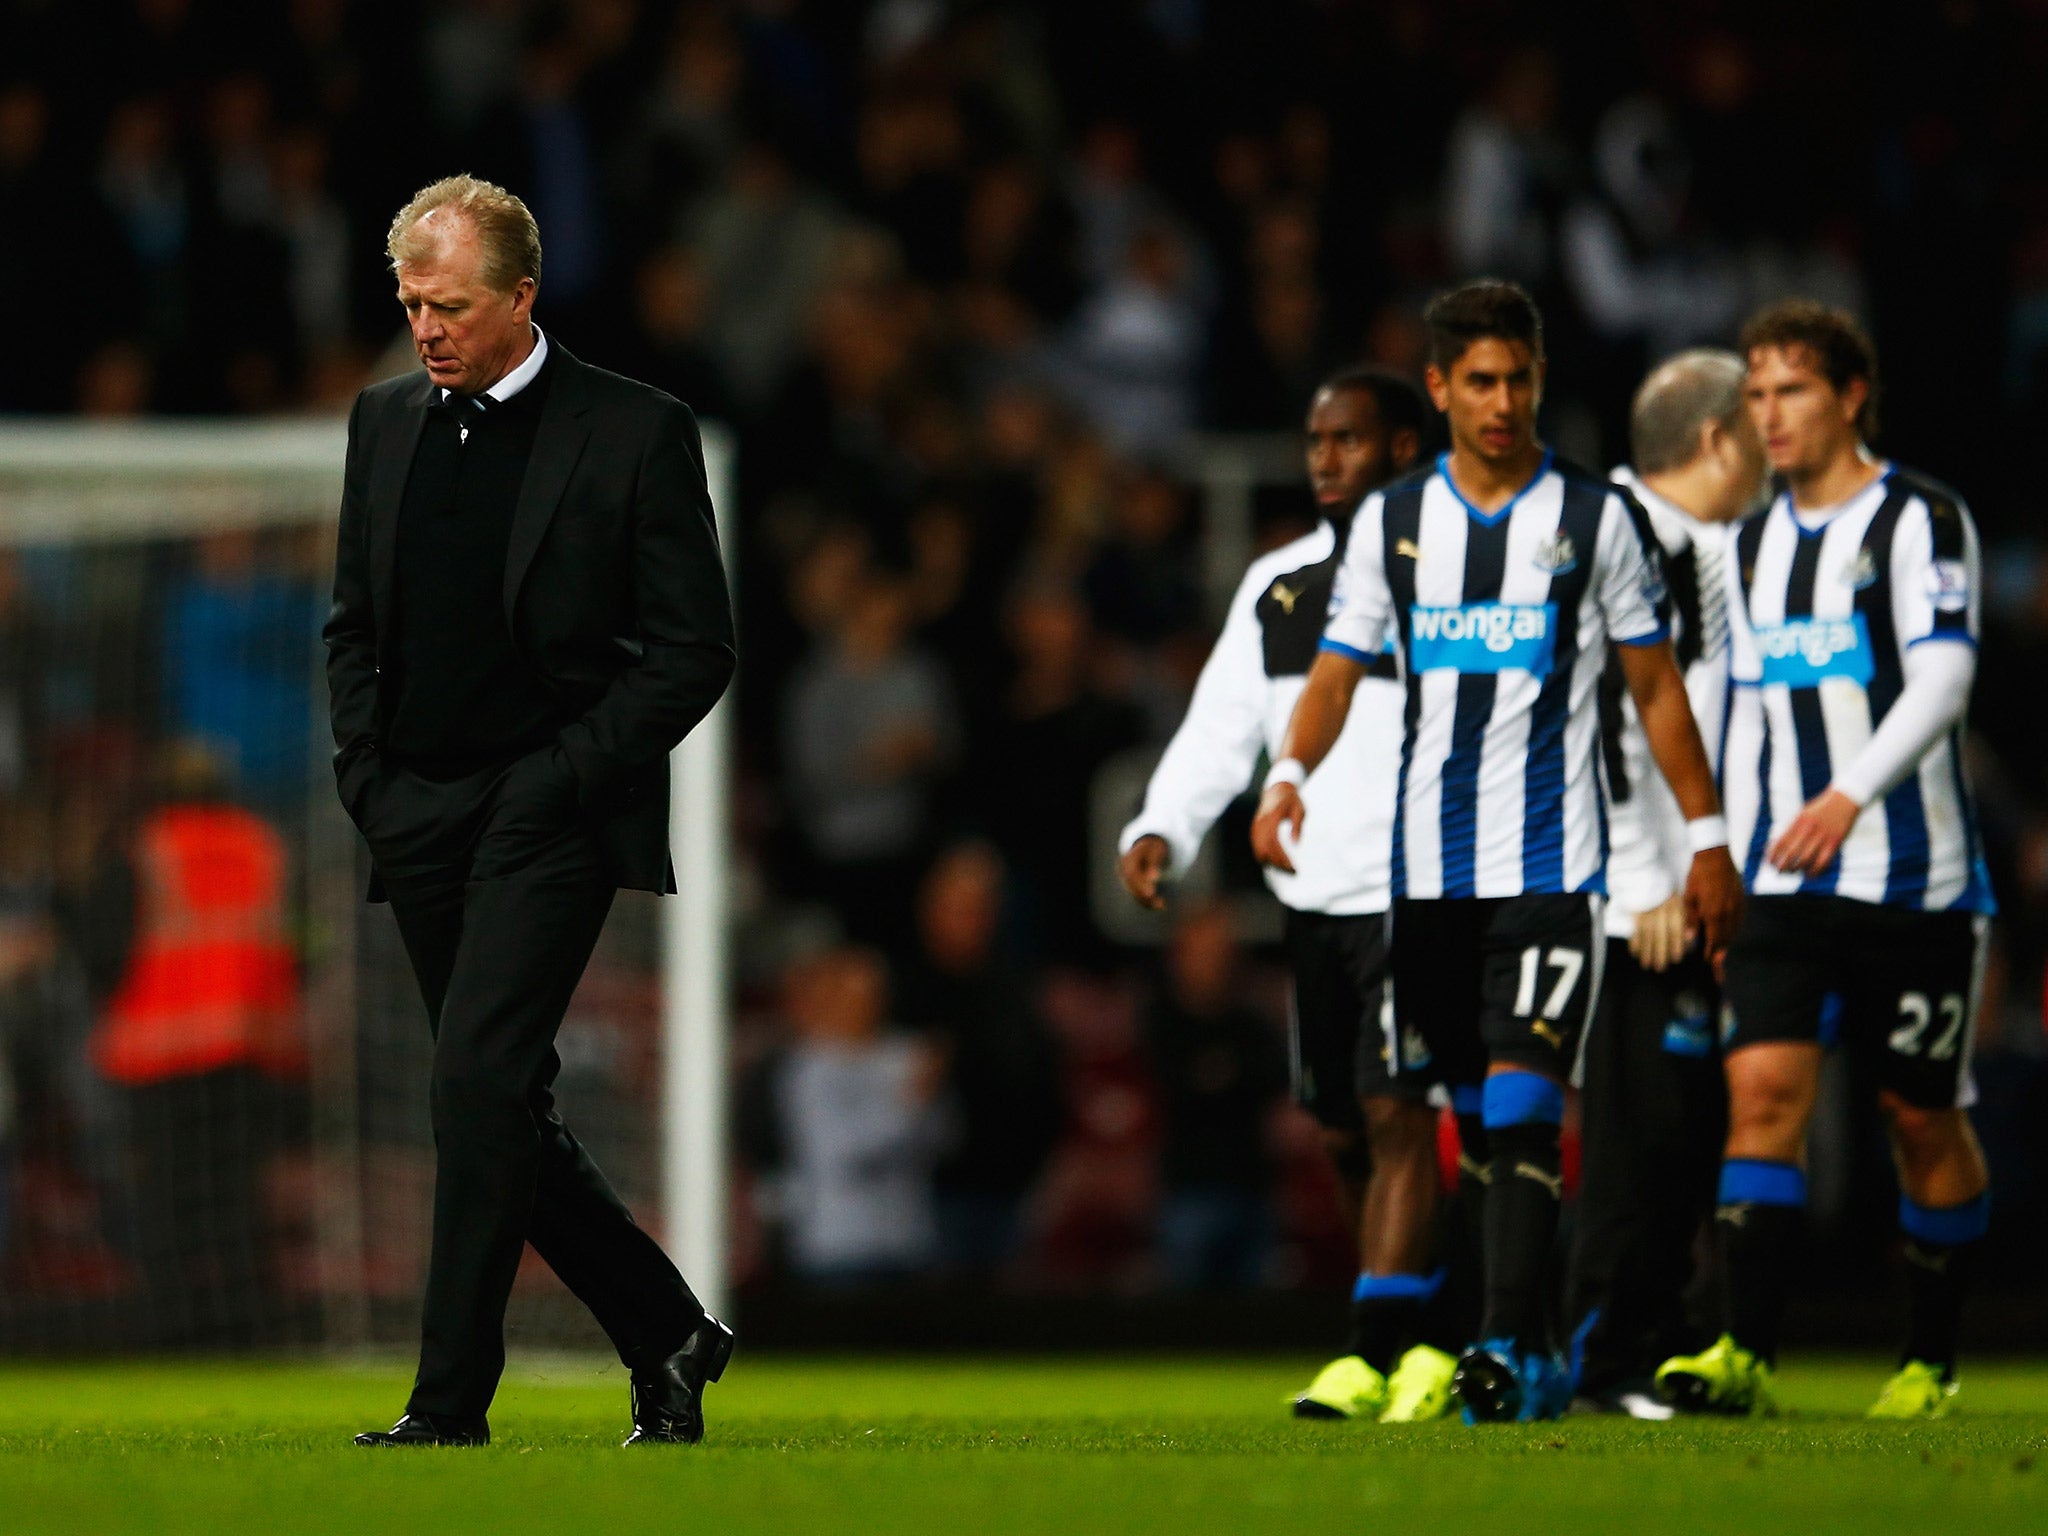 McClaren's Newcastle put in a poor showing against West Ham United